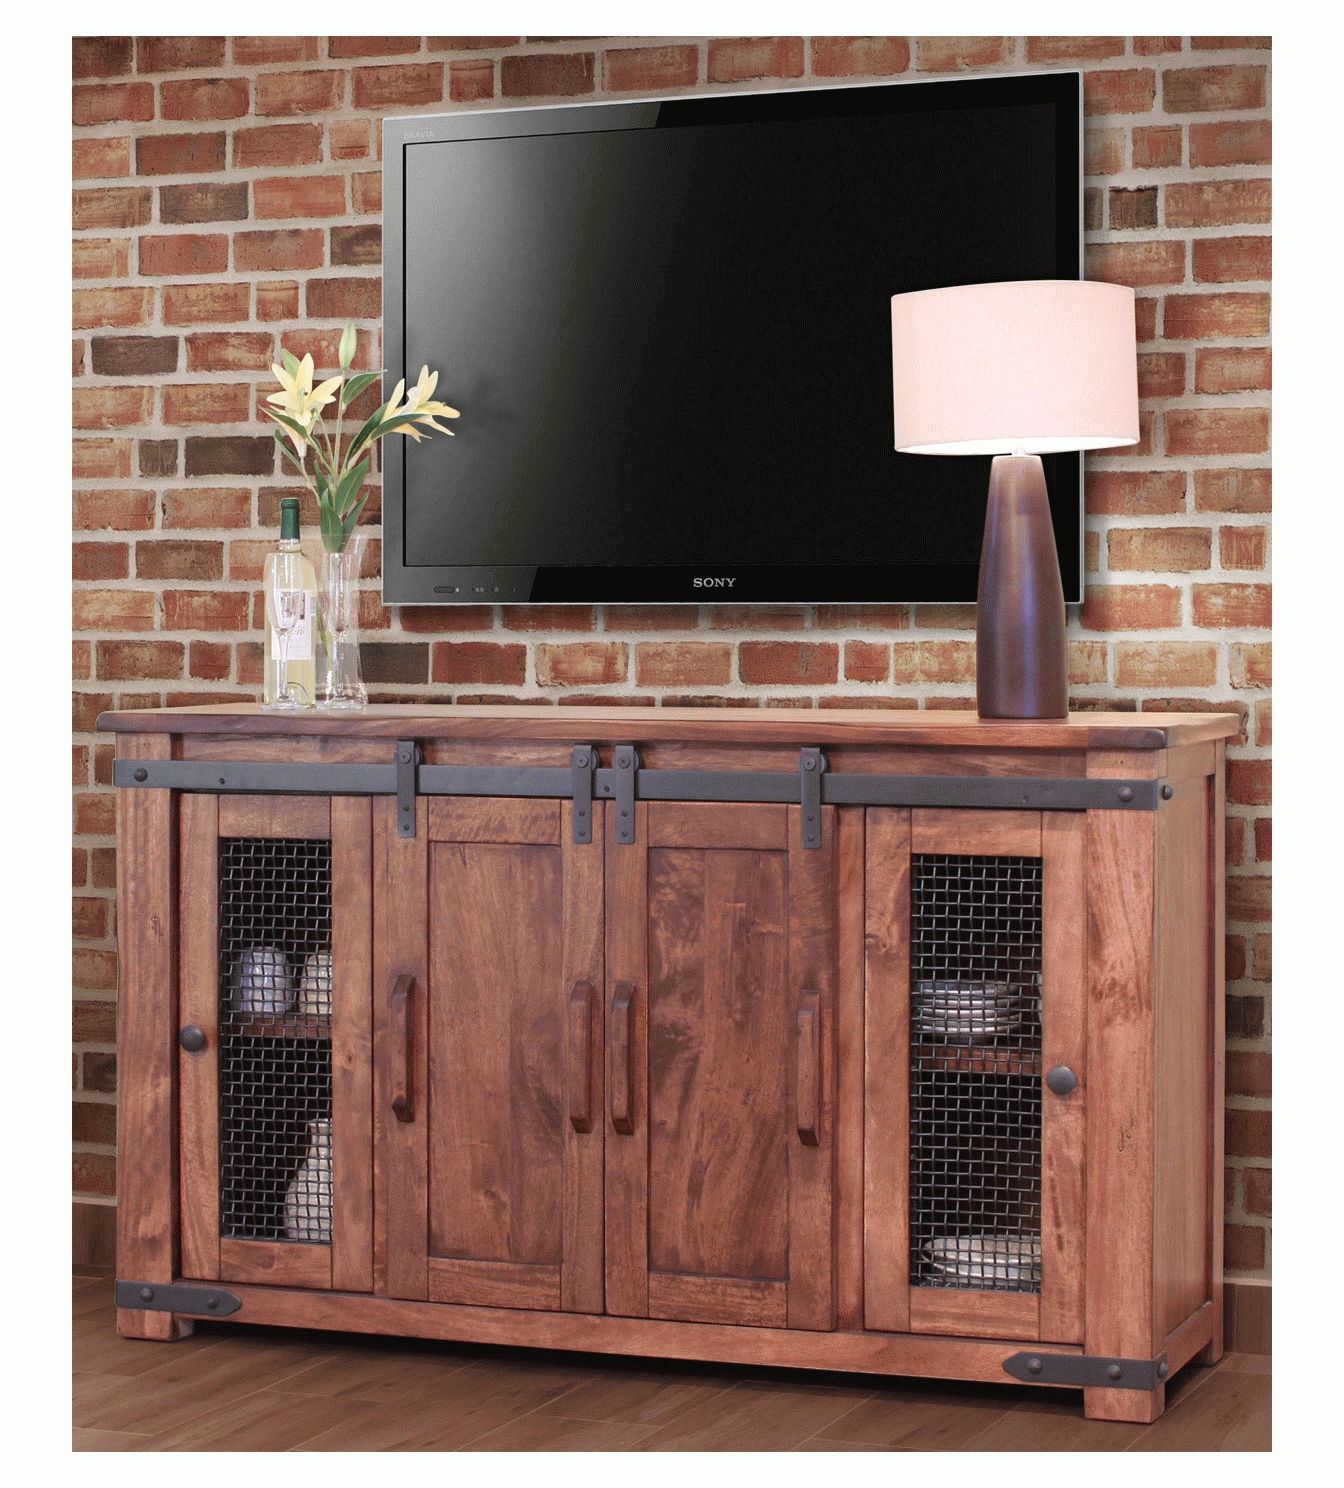 Rustic Barn Door Tv Stand, Barn Door Tv Stand Intended For Rustic Tv Stands For Sale (View 7 of 15)